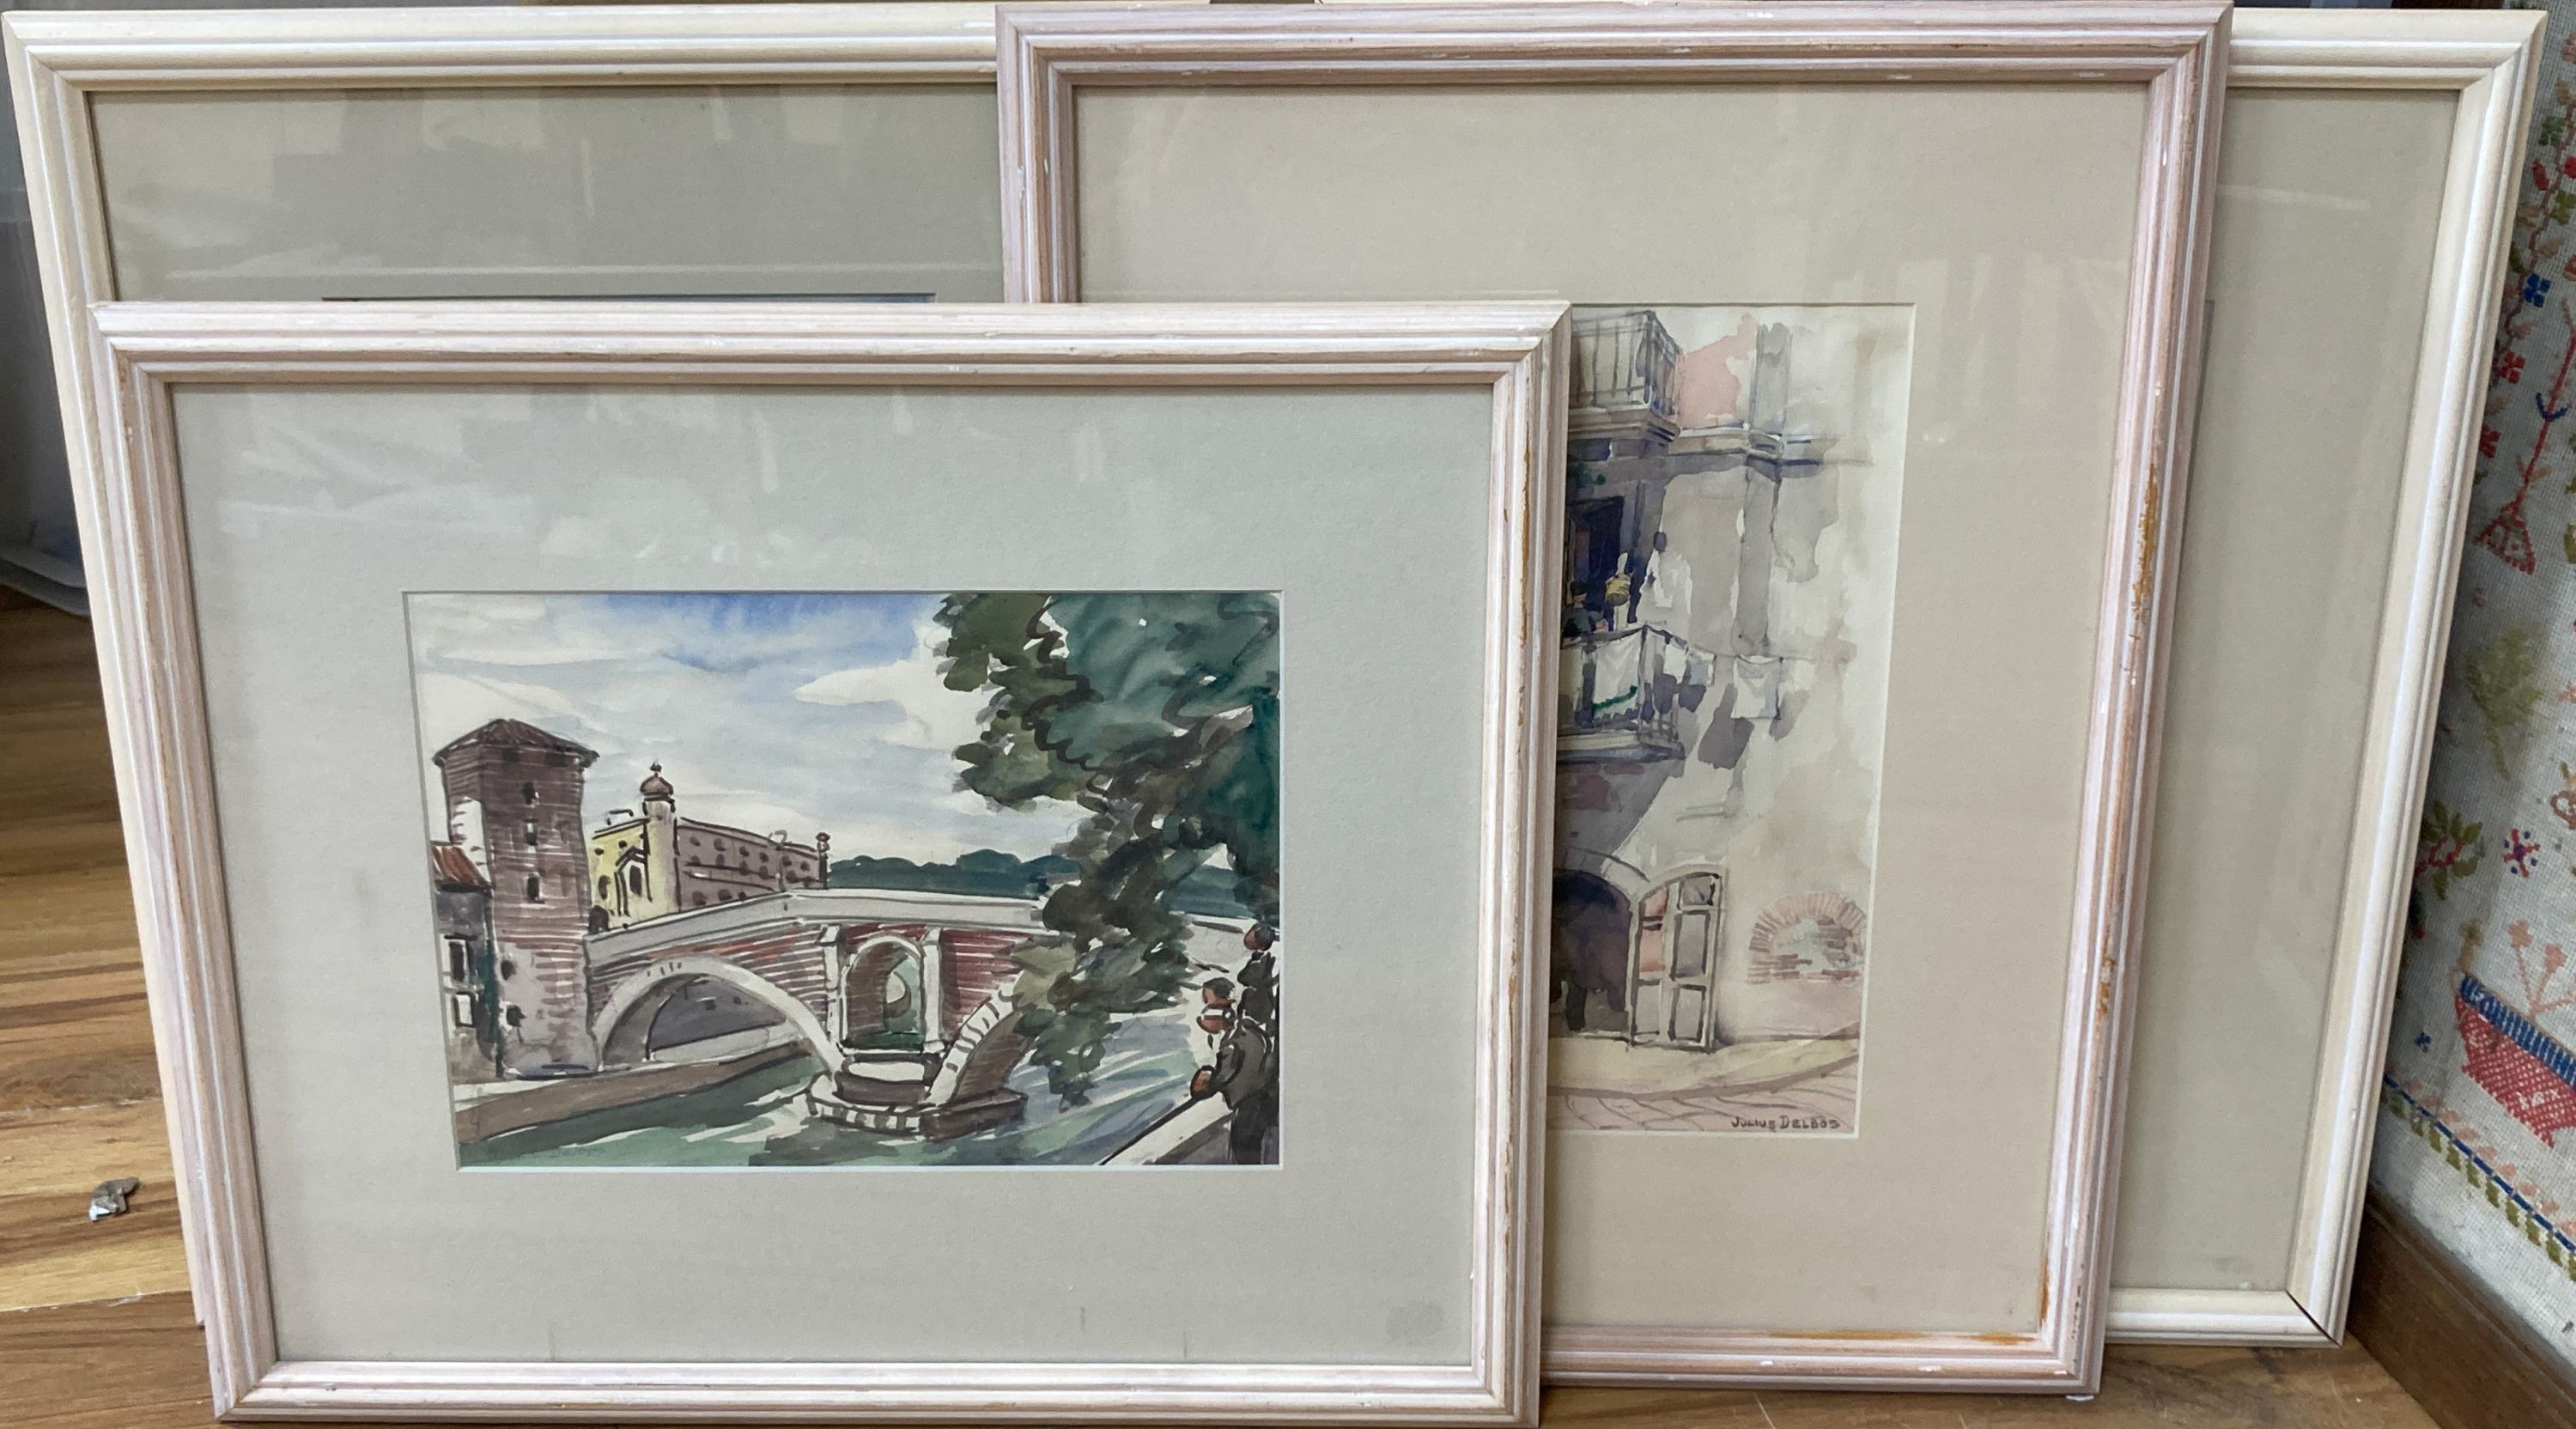 Julius Delos (1879-1970), four watercolours, Views in Naples, Rome and Venice, signed, largest 30 x